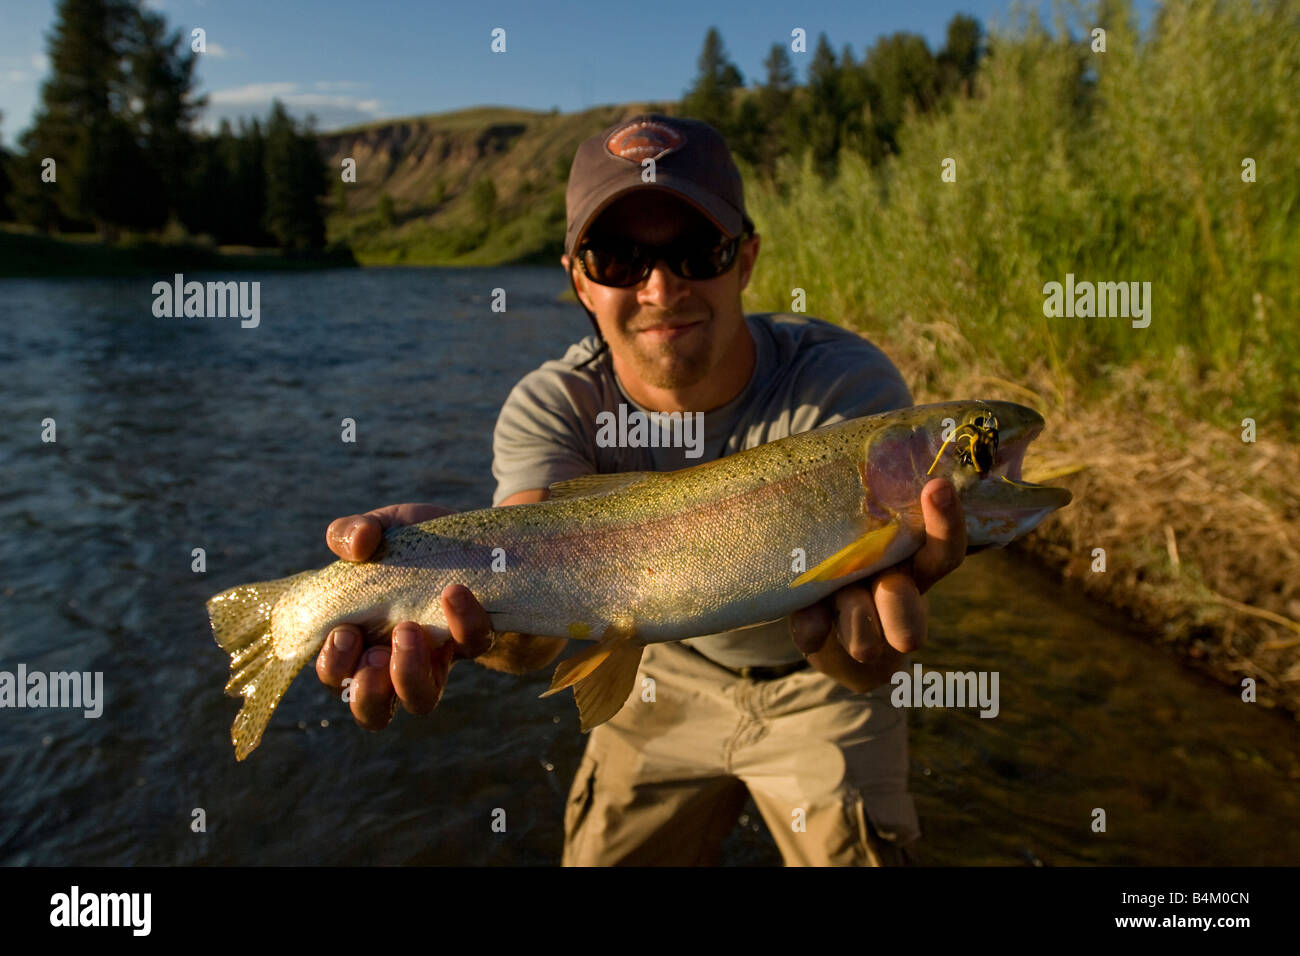 Angler fly fisherman with large rainbow trout in Montana Stock Photo - Alamy